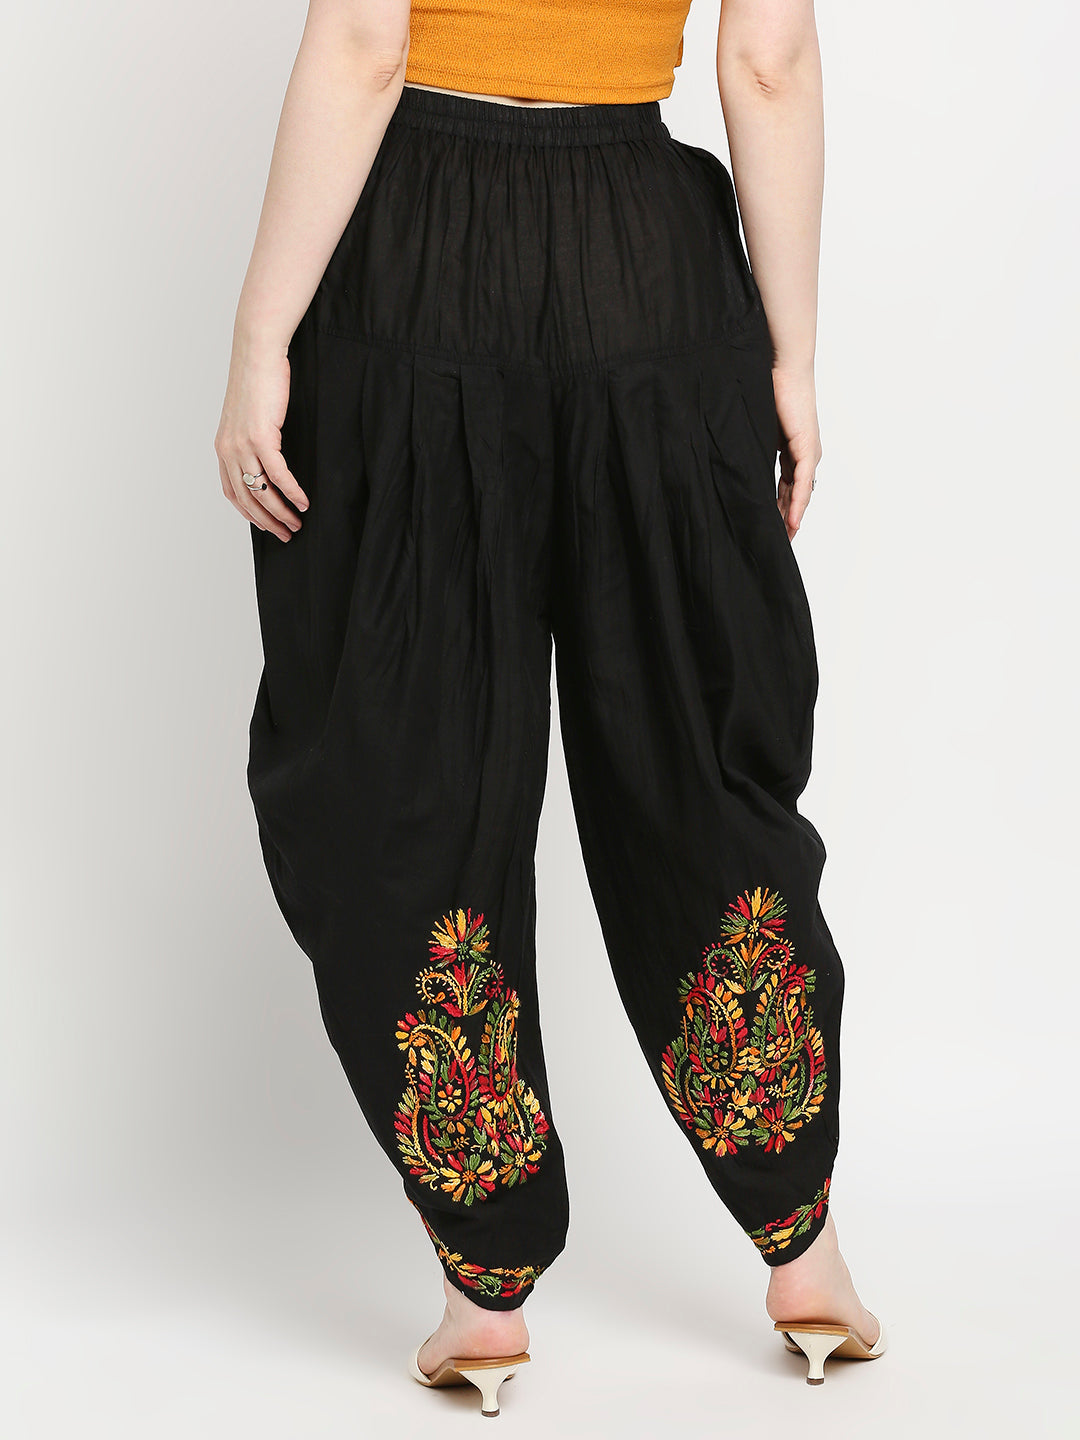 Elegant Black Colour Rayon Embroidered Stitched Dhoti Salwar For Women at  Rs 537.00 | Dhoti Pant | ID: 26147972988